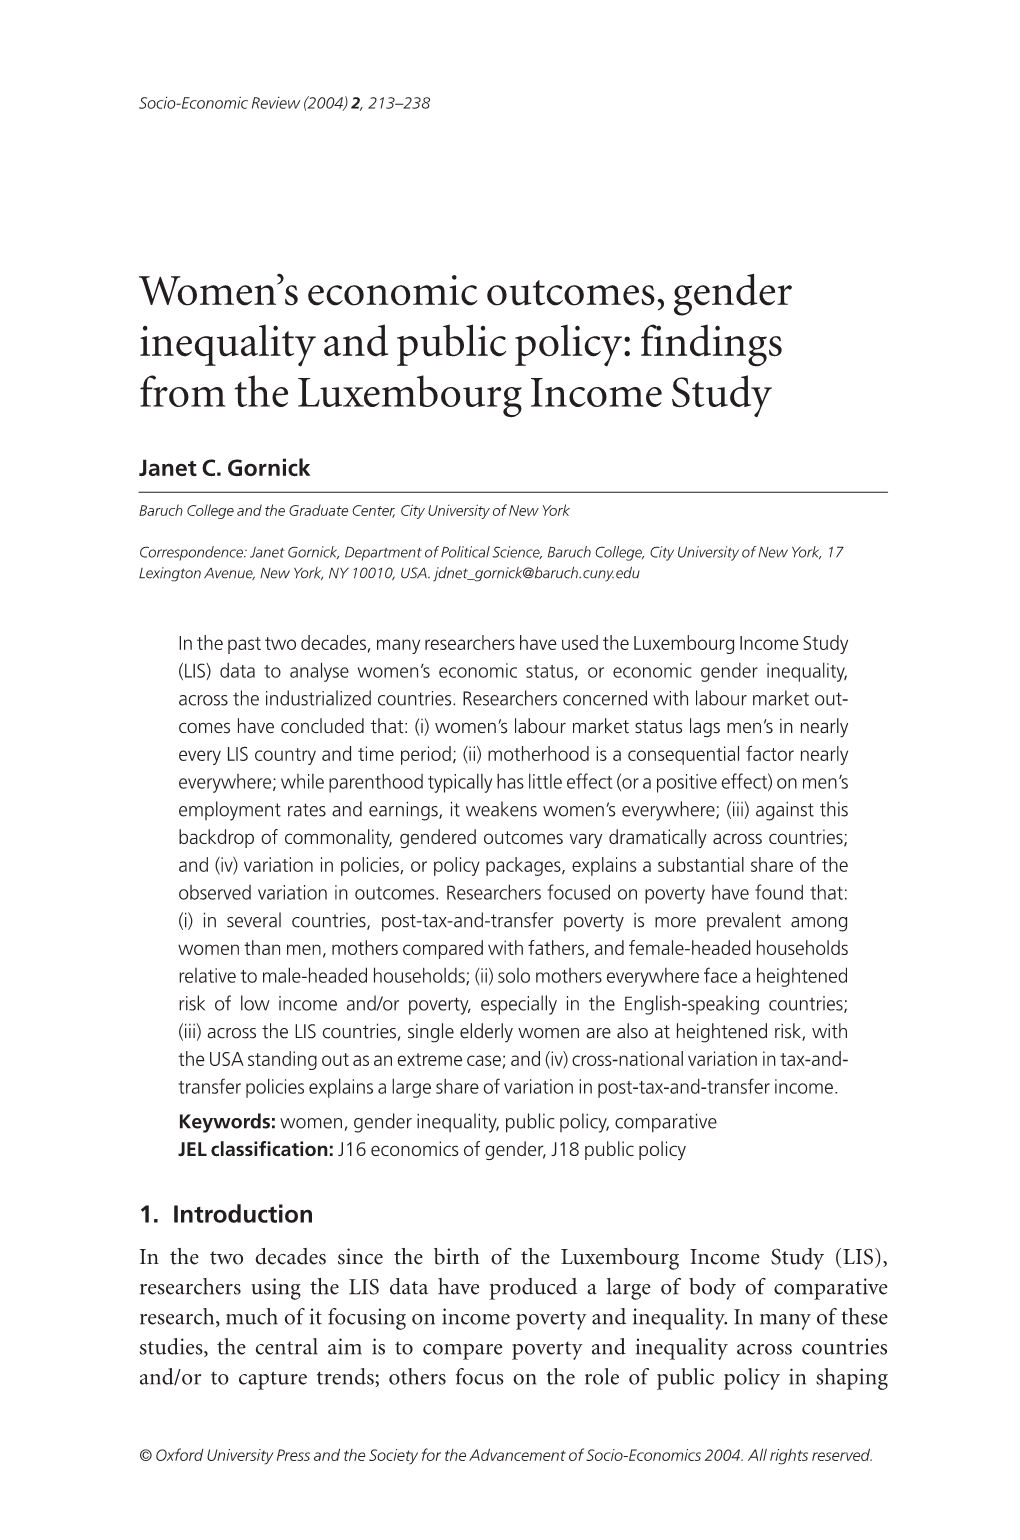 Women's Economic Outcomes, Gender Inequality and Public Policy